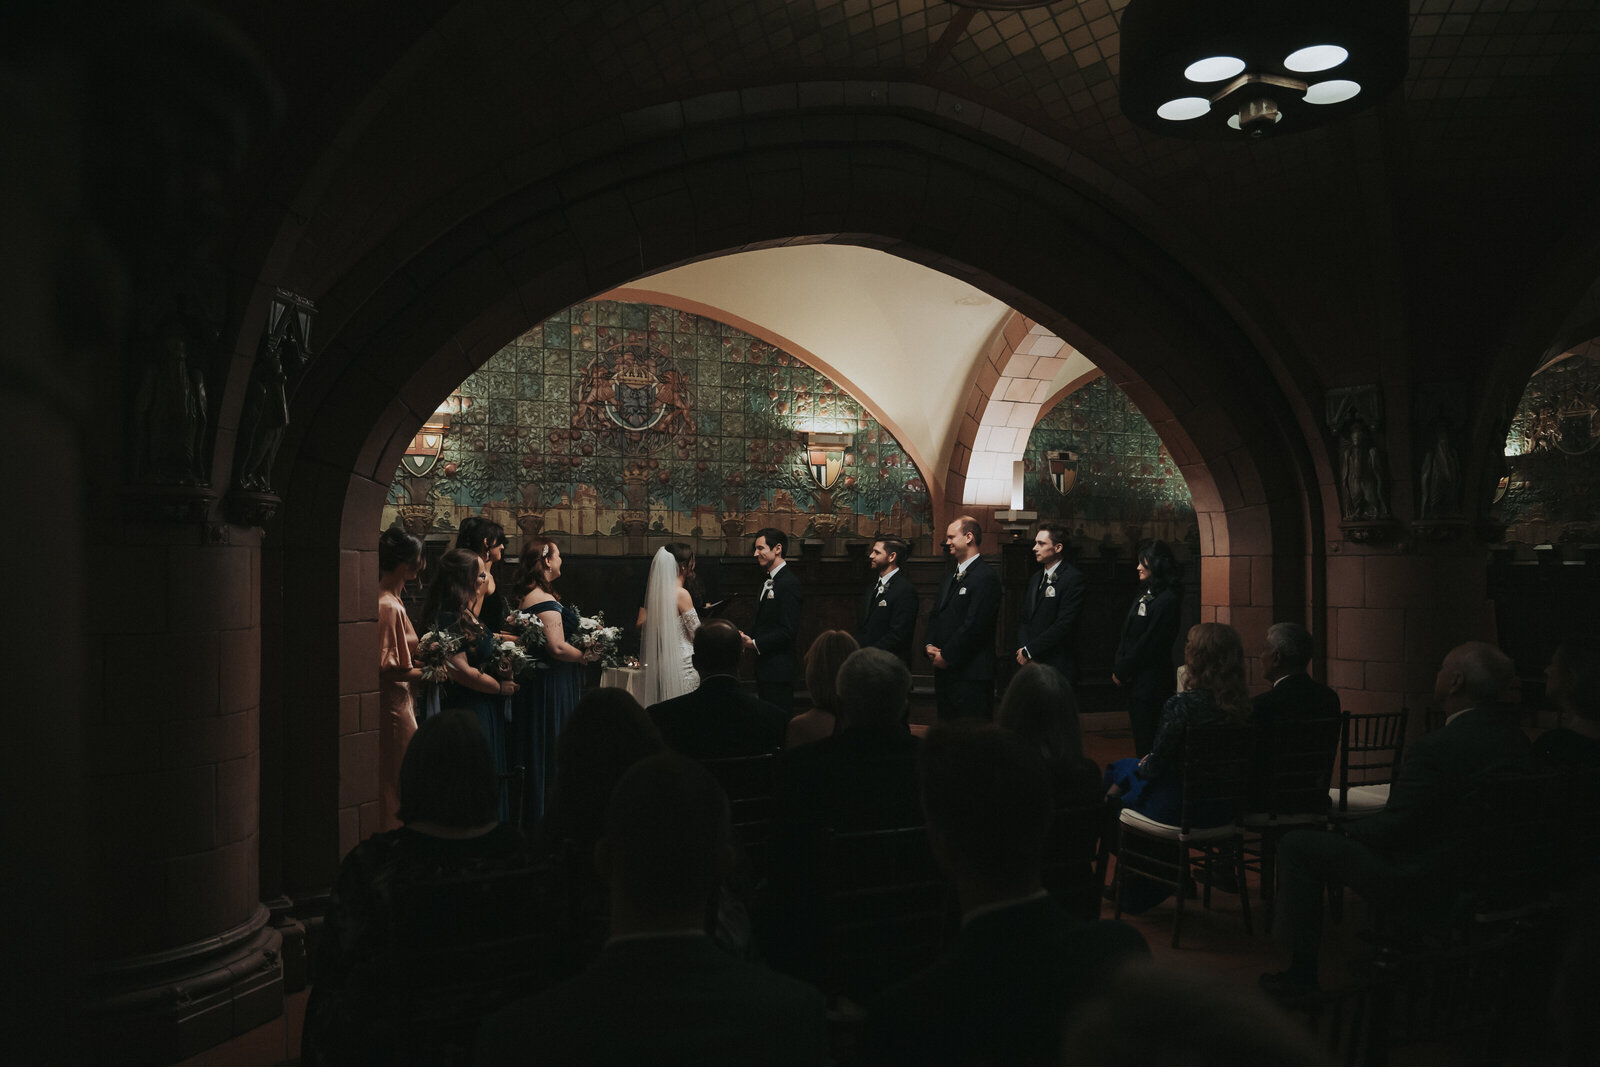 Wedding ceremony in the Rathskeller Room in The Seelbach Hotel